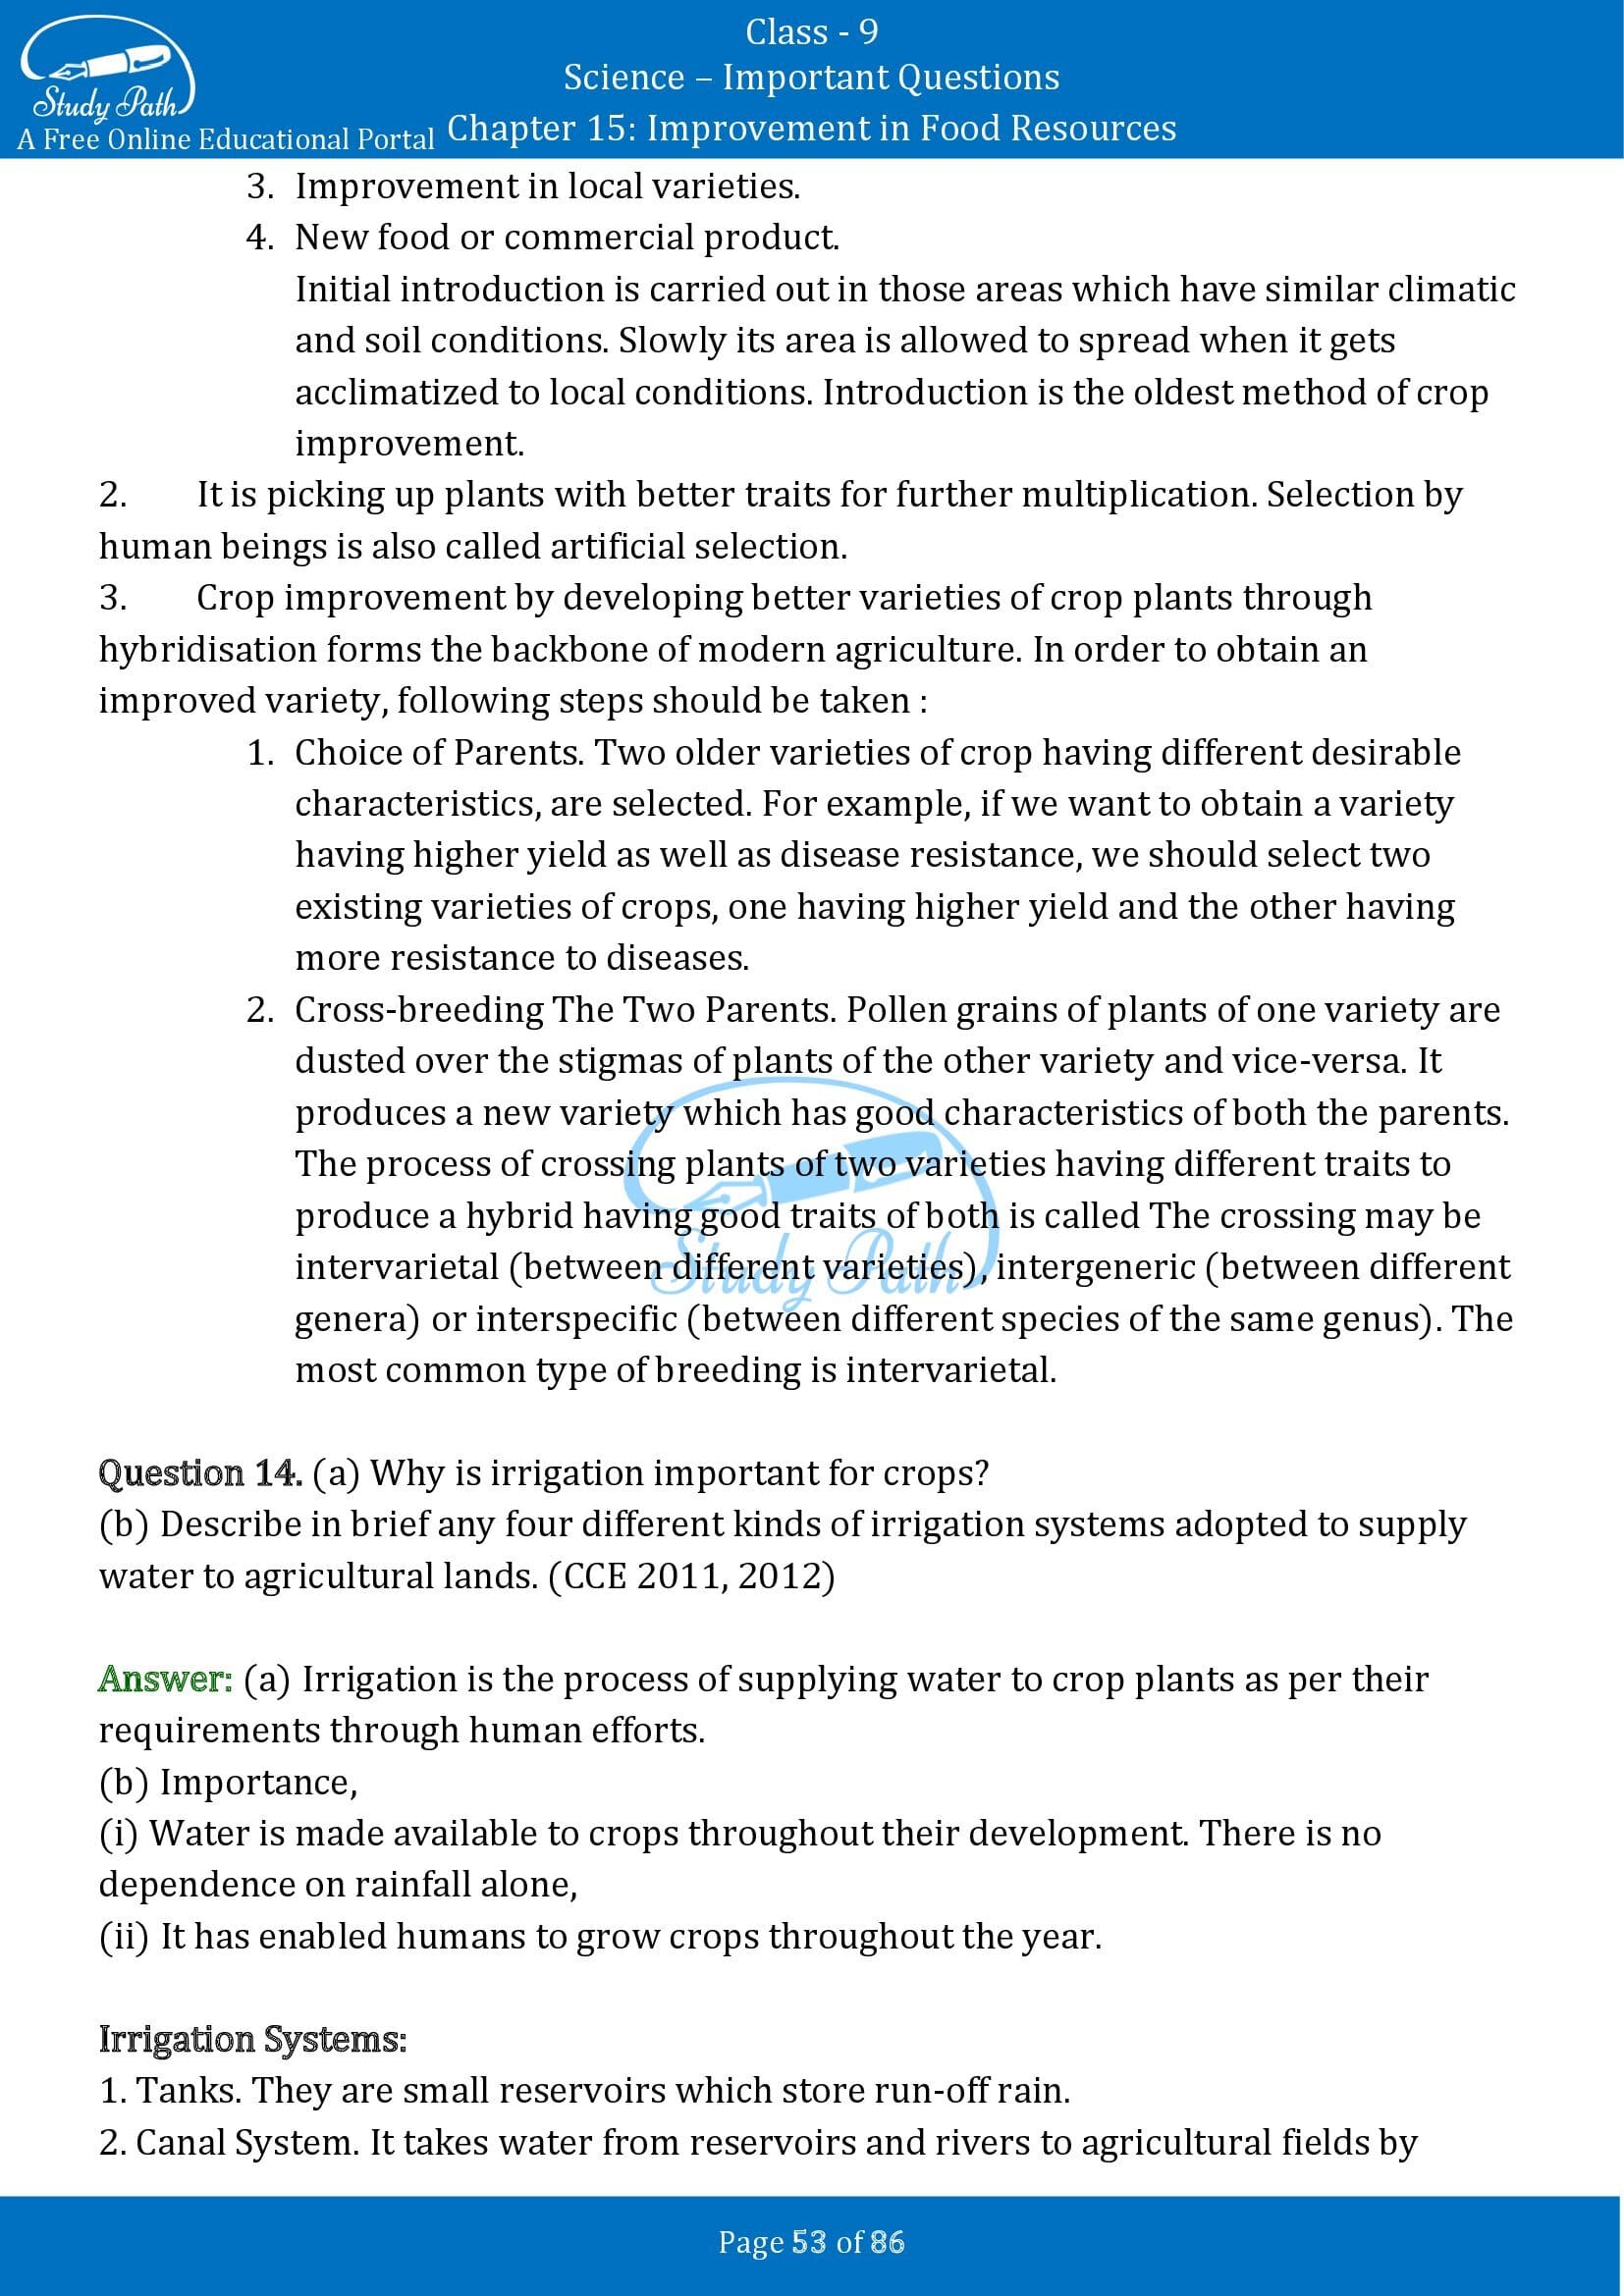 Important Questions for Class 9 Science Chapter 15 Improvement in Food Resources 00053